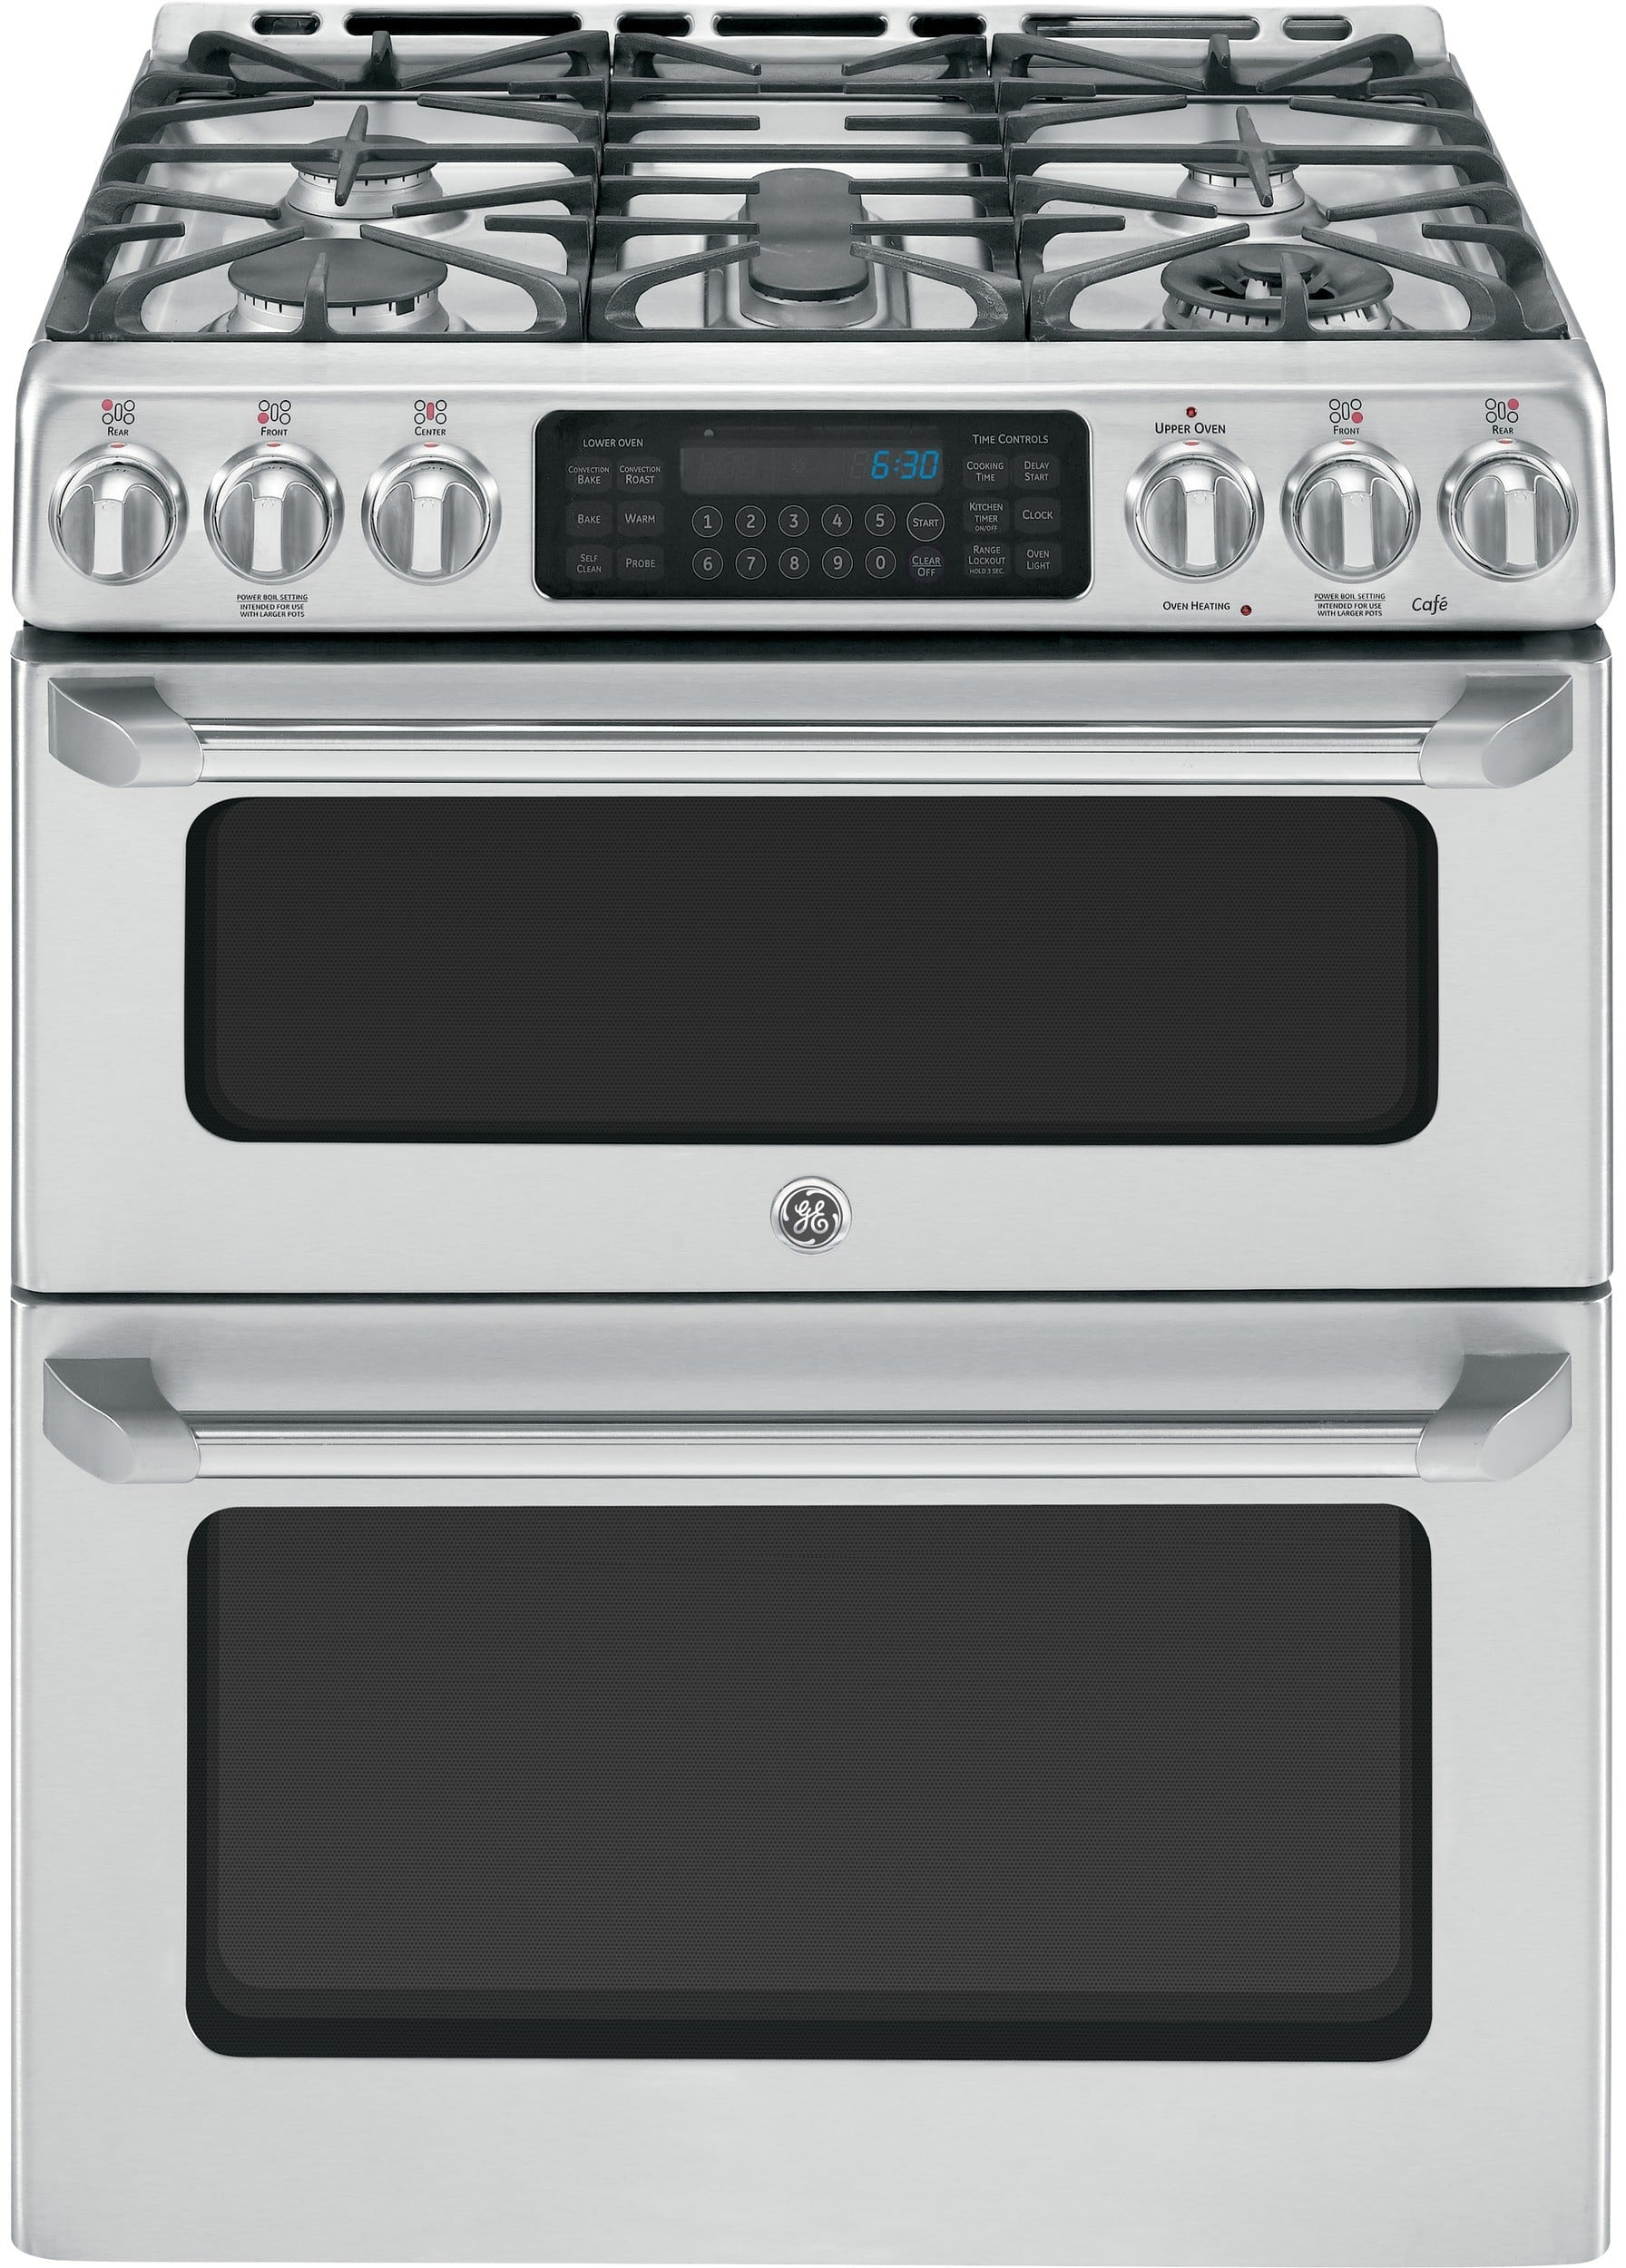 GE CGS990SETSS 30 Inch Slide In Caf Series Double Oven Gas Range With 